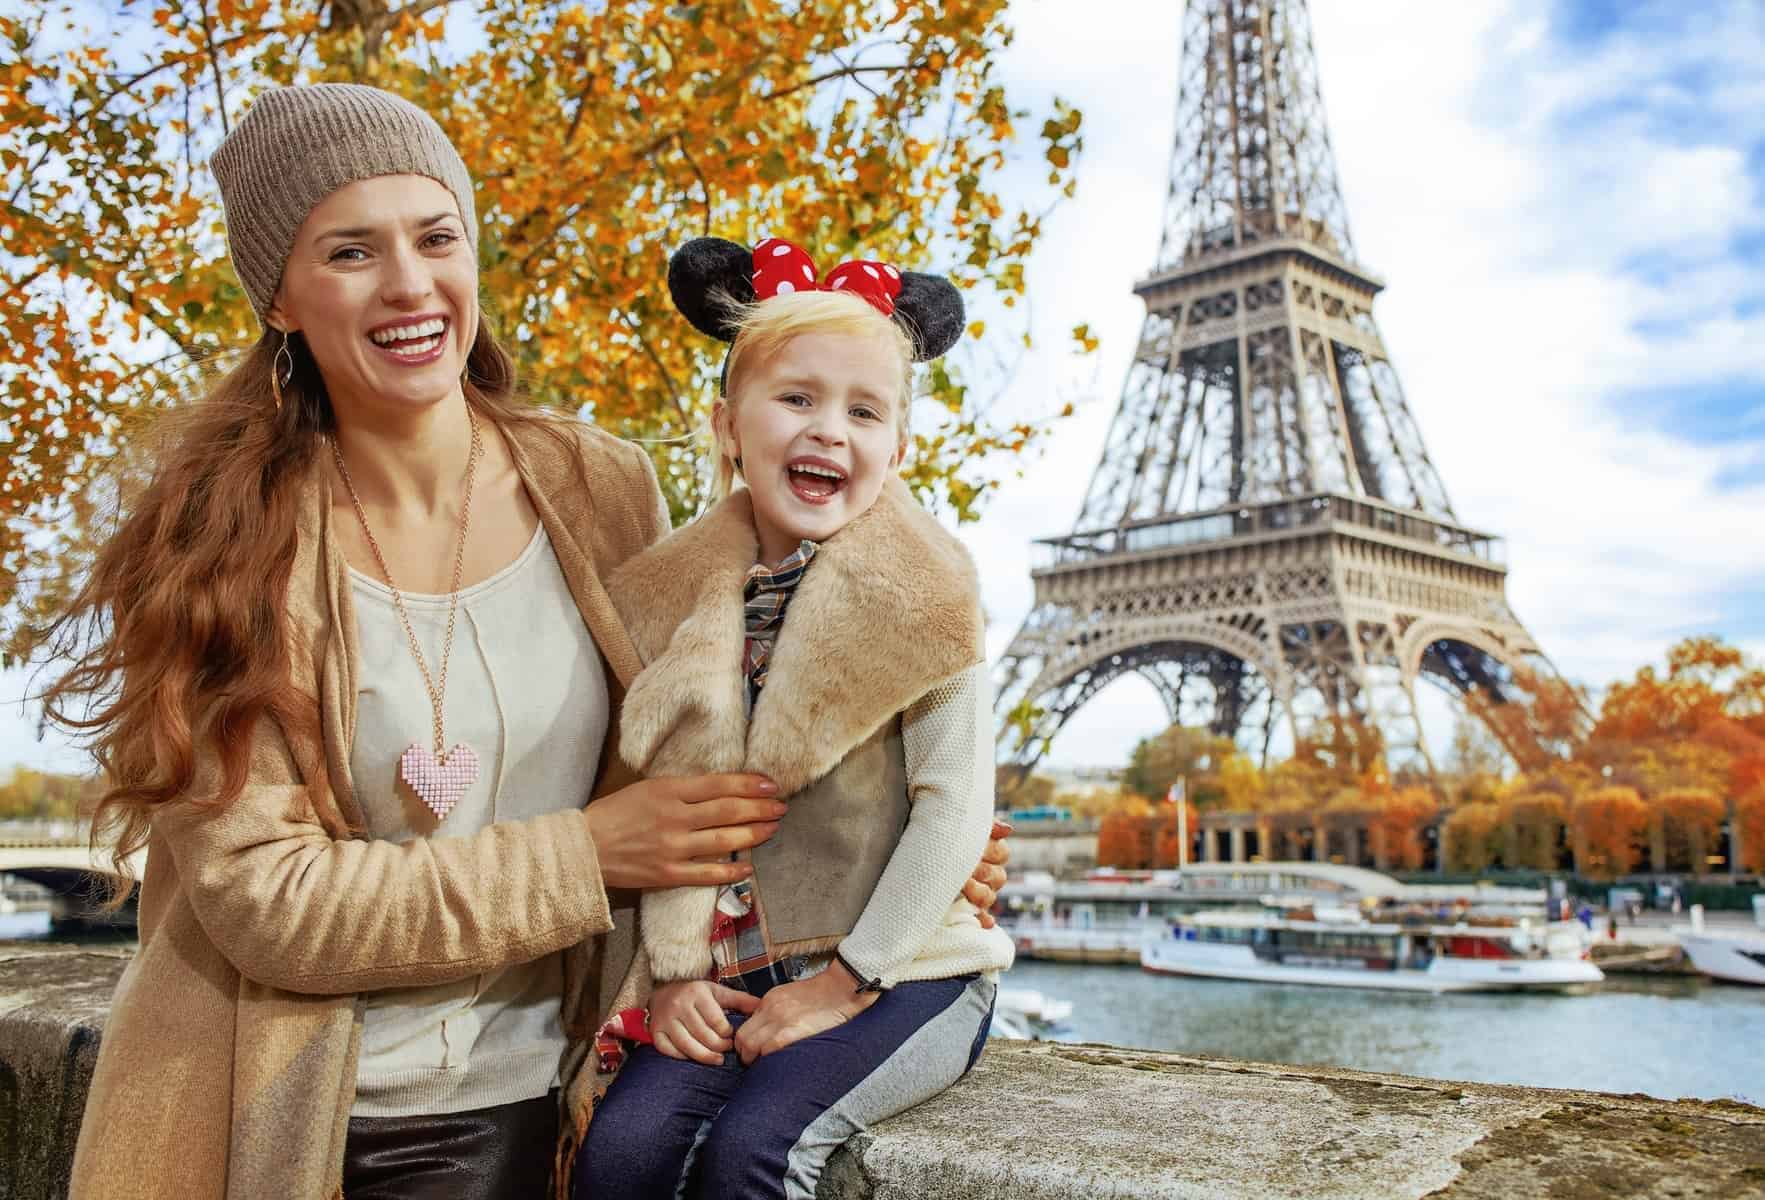 Perfect autumn holidays in Disneyland and Paris. Portrait of smiling tourists mother and daughter in Minnie Mouse Ears on embankment near Eiffel tower in Paris, France sitting on the parapet